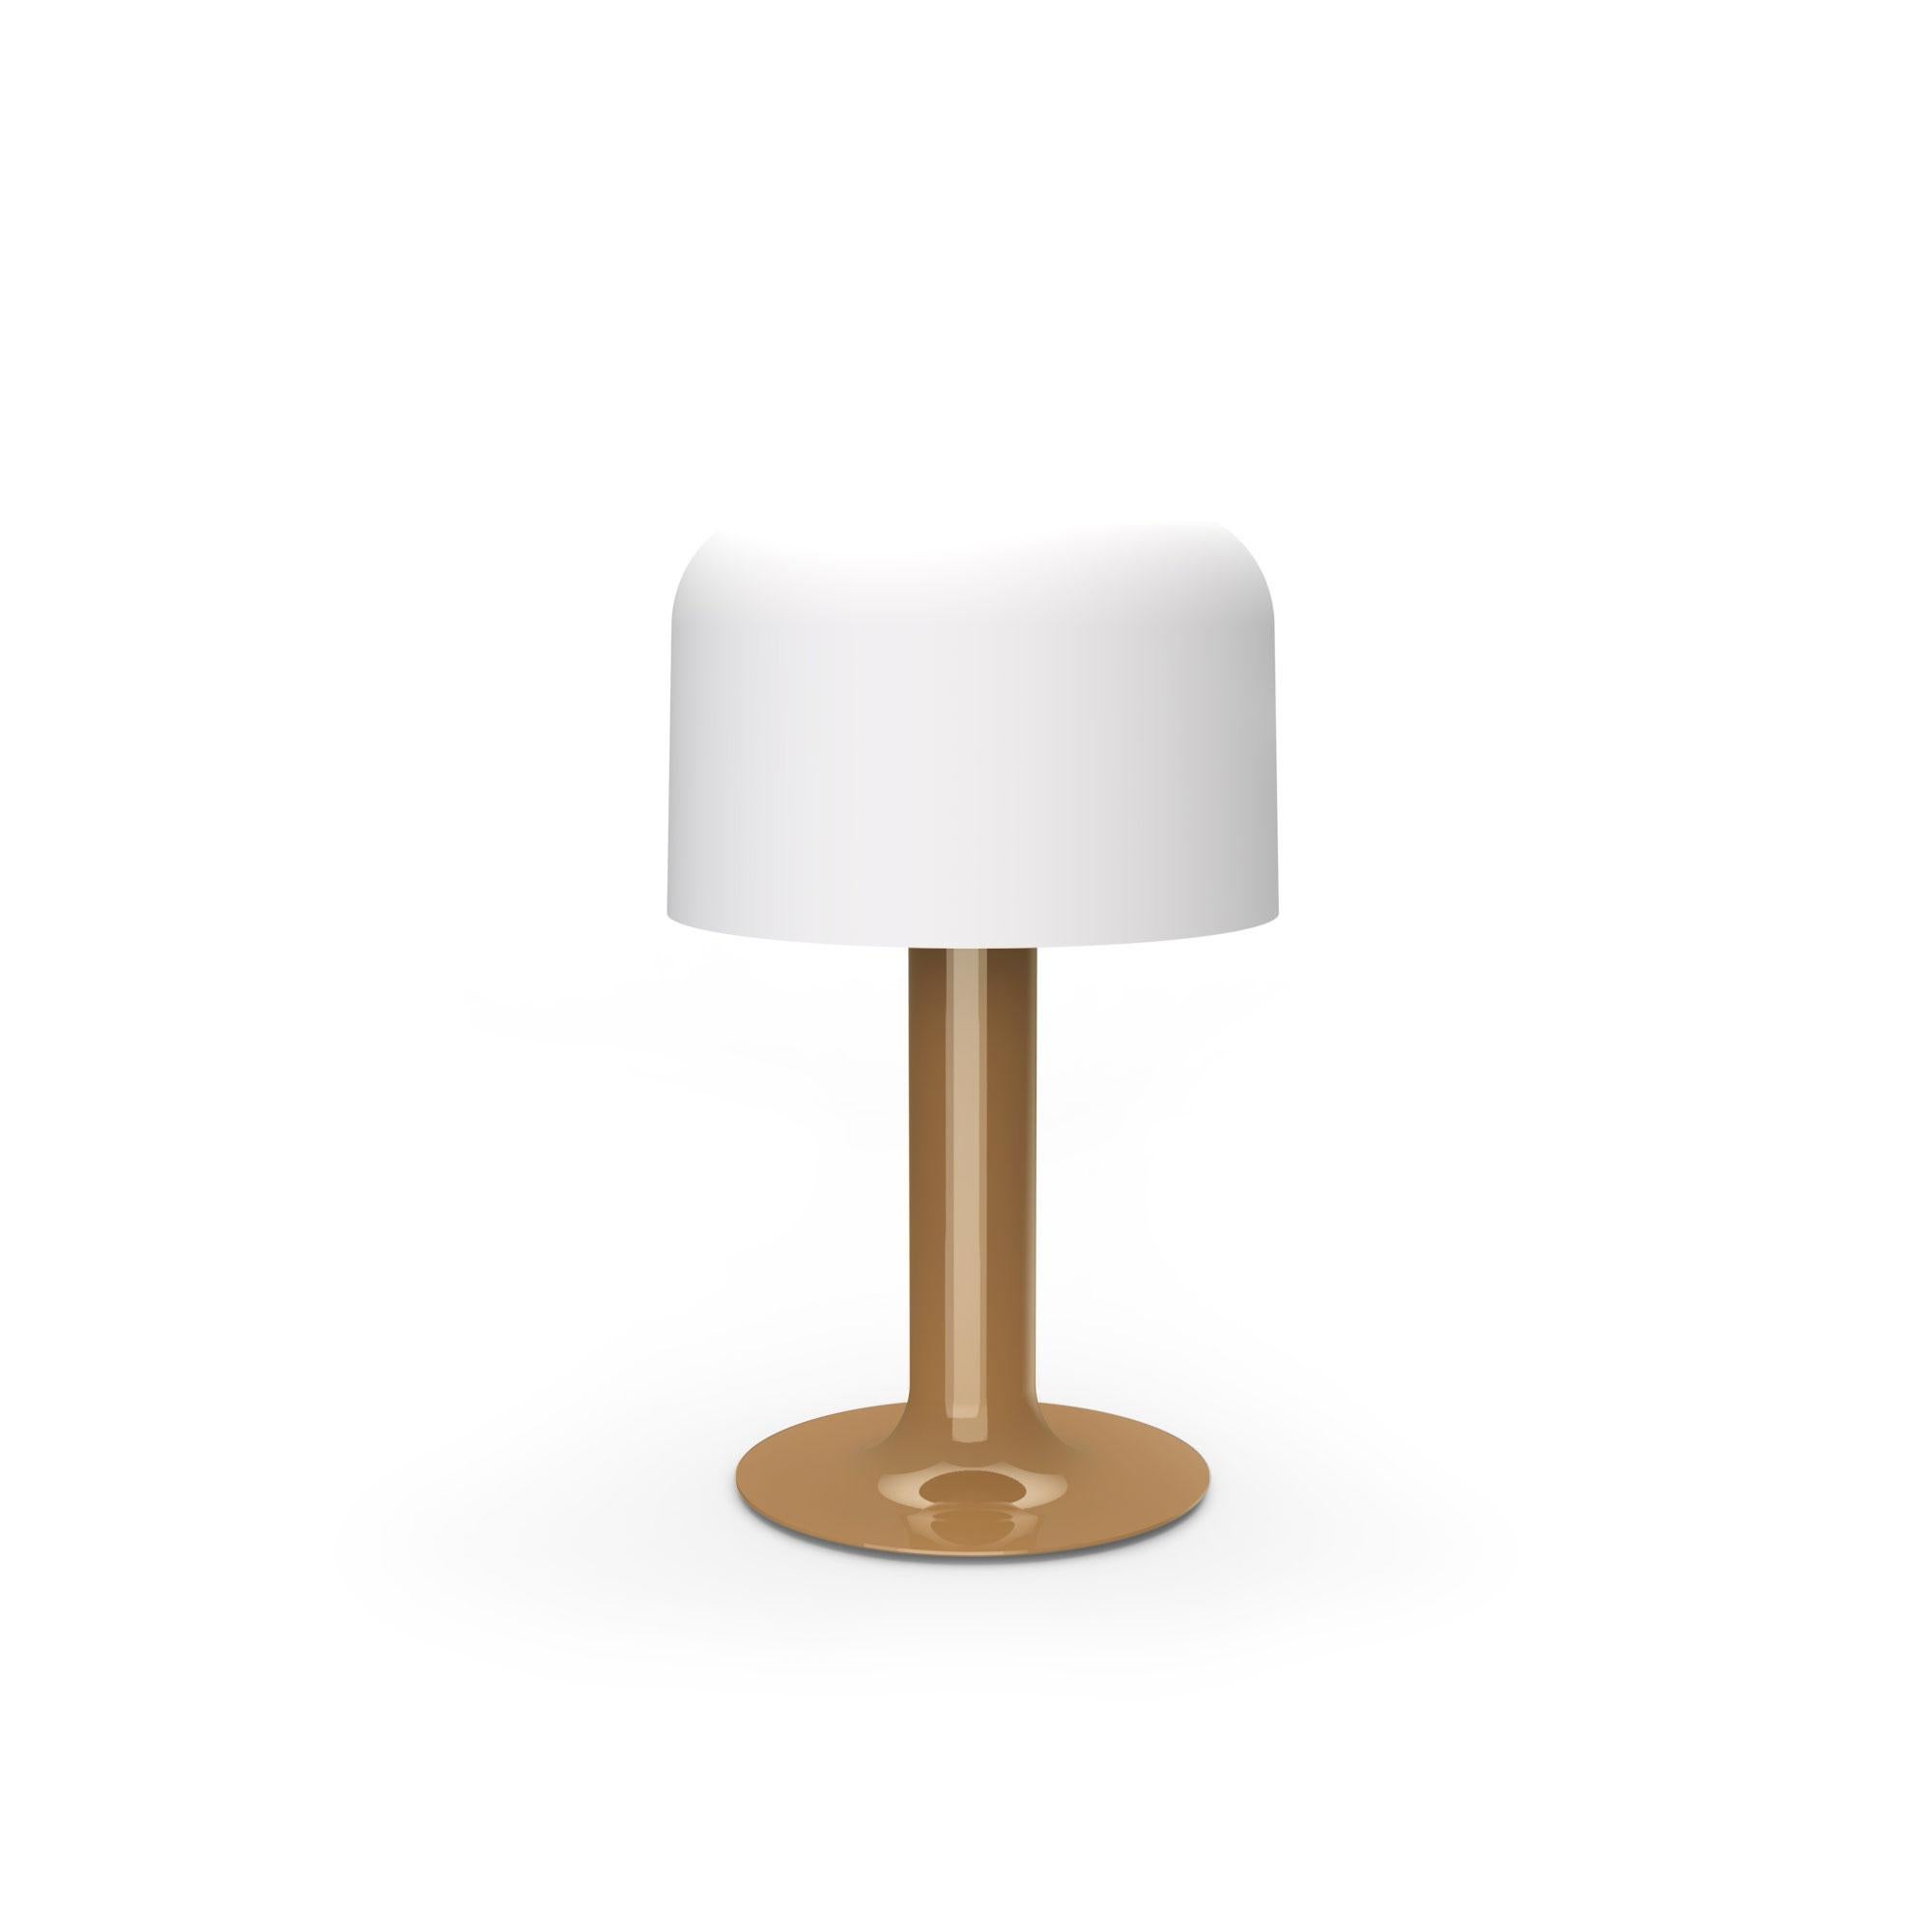 Michel Mortier 10497 Metal and Glass Table Lamp for Disderot in Chamois In New Condition For Sale In Glendale, CA